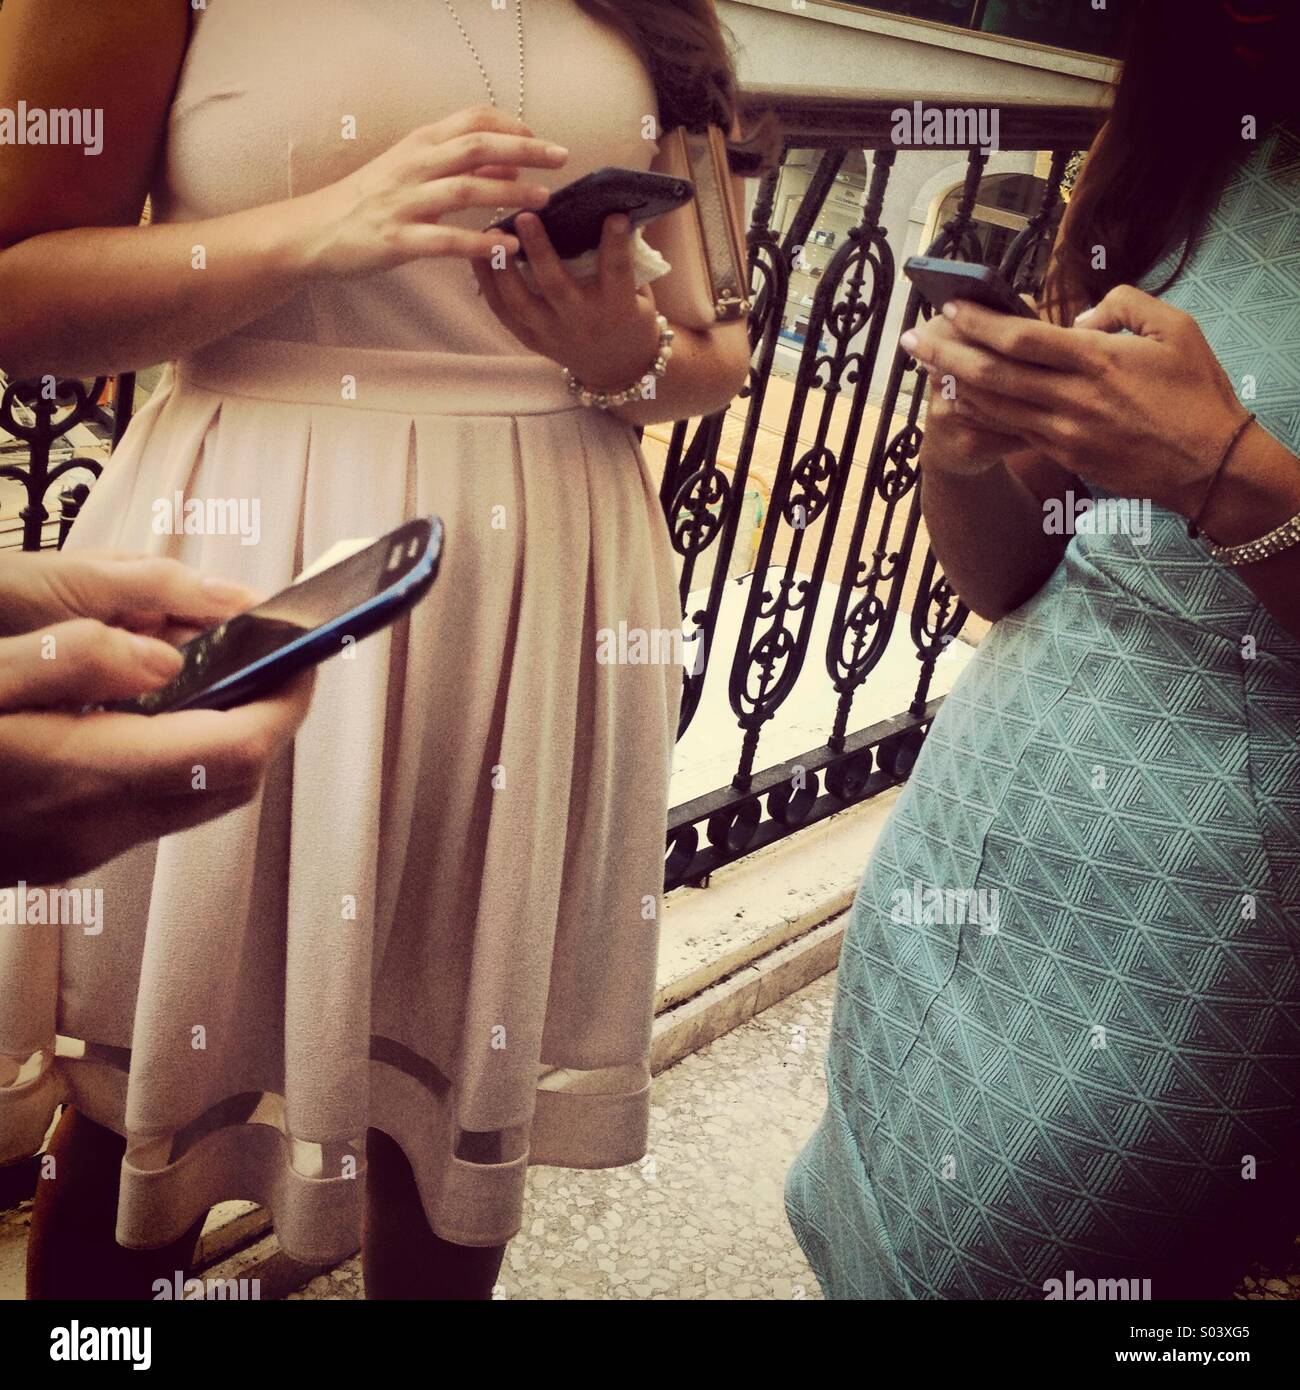 People standing using mobile phones for texting and social media Stock Photo